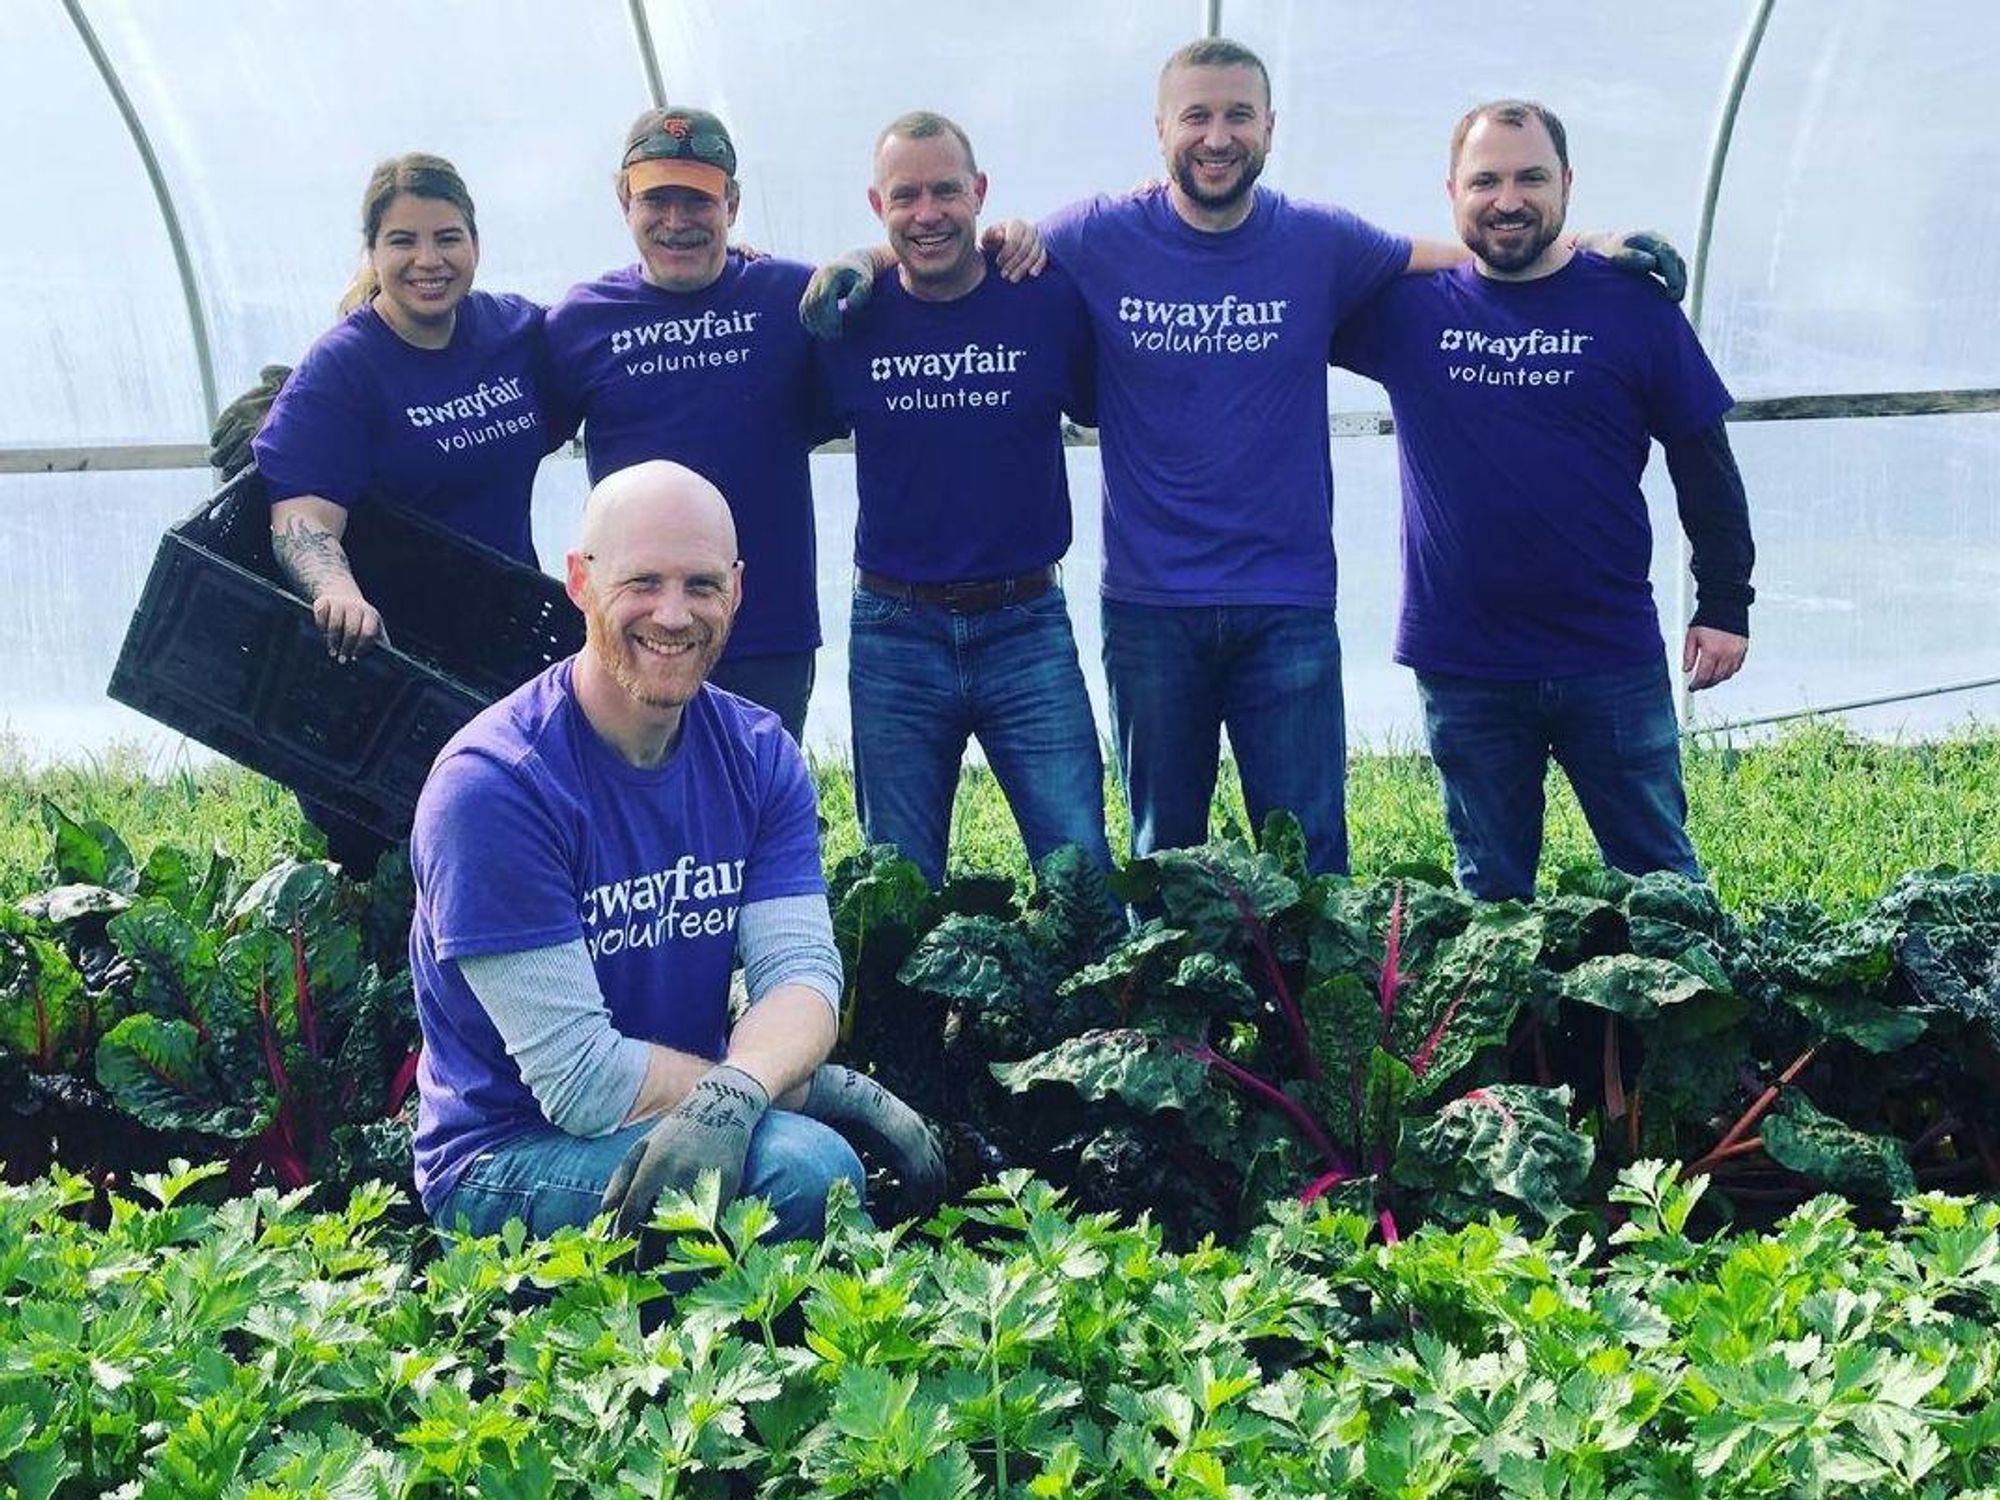 Wayfair employees take part in a community service project.